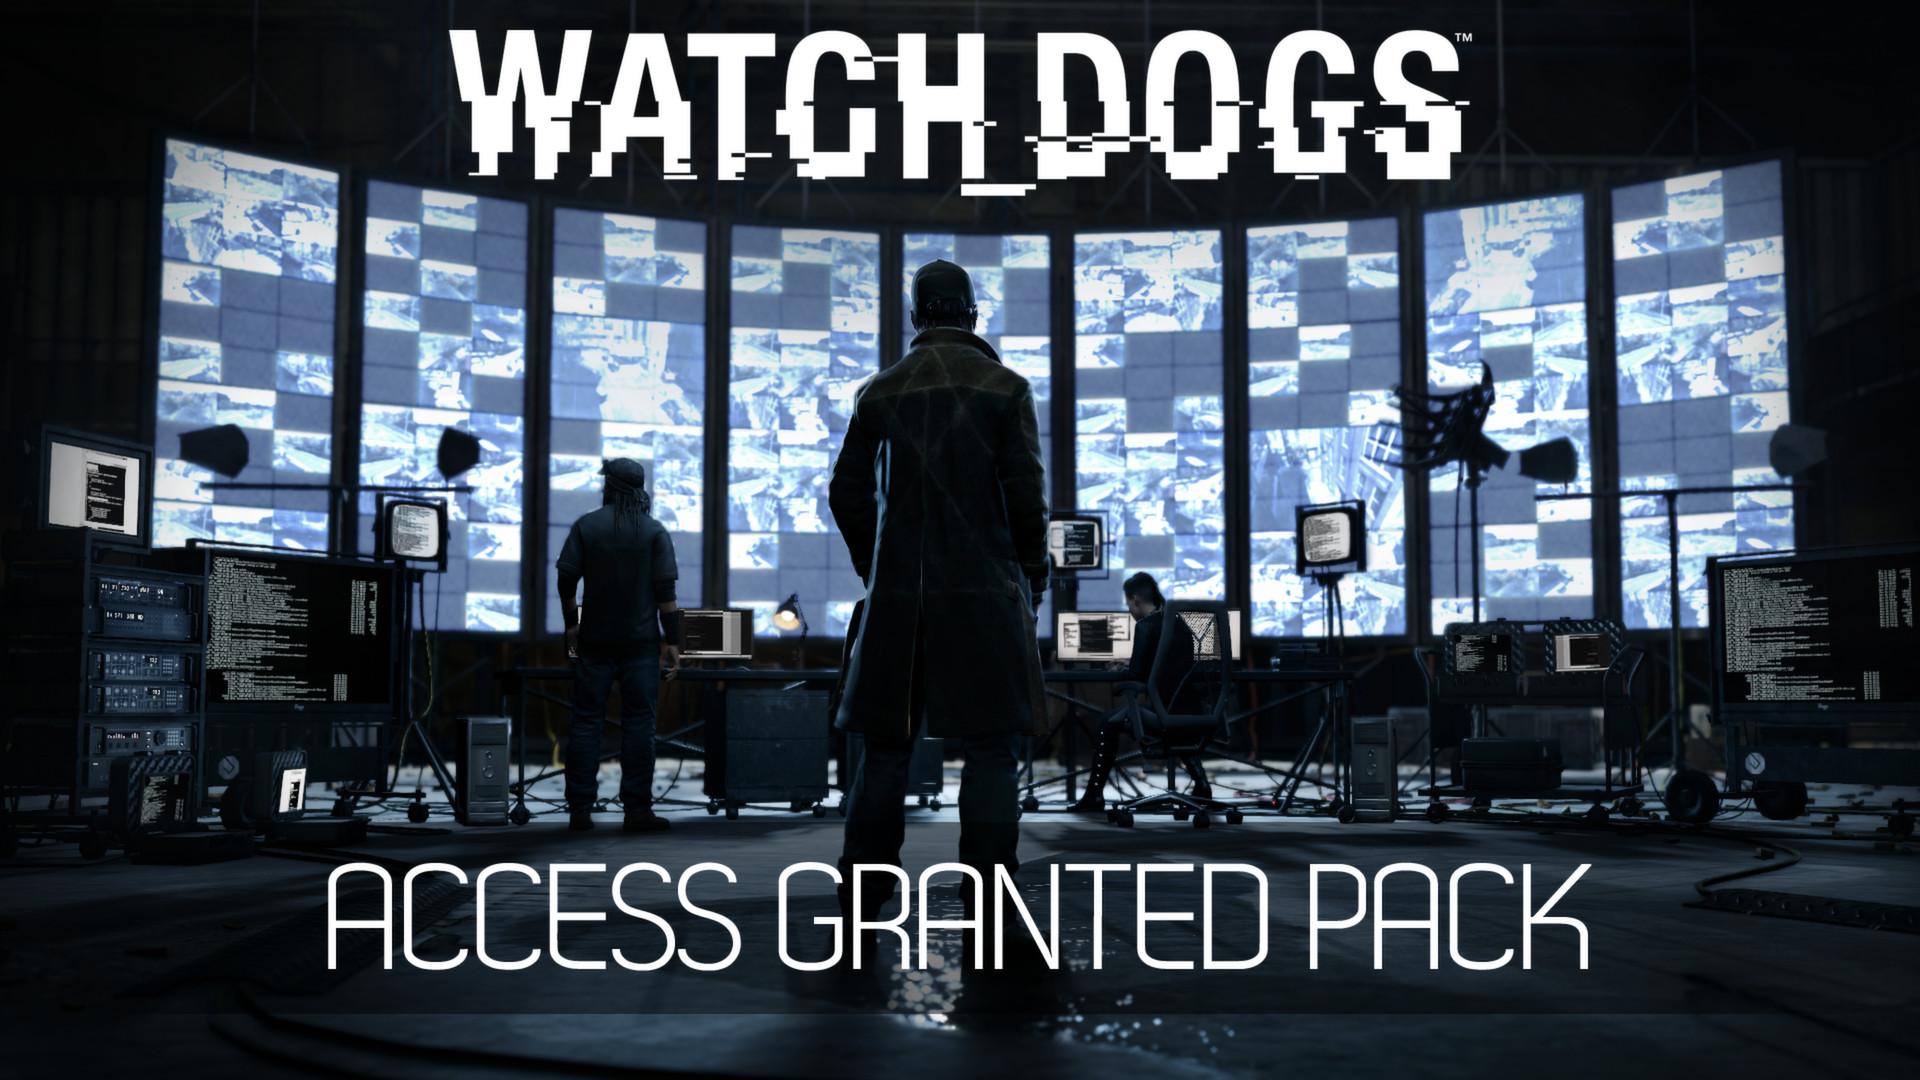 Watch_Dogs - Access Granted Pack screenshot